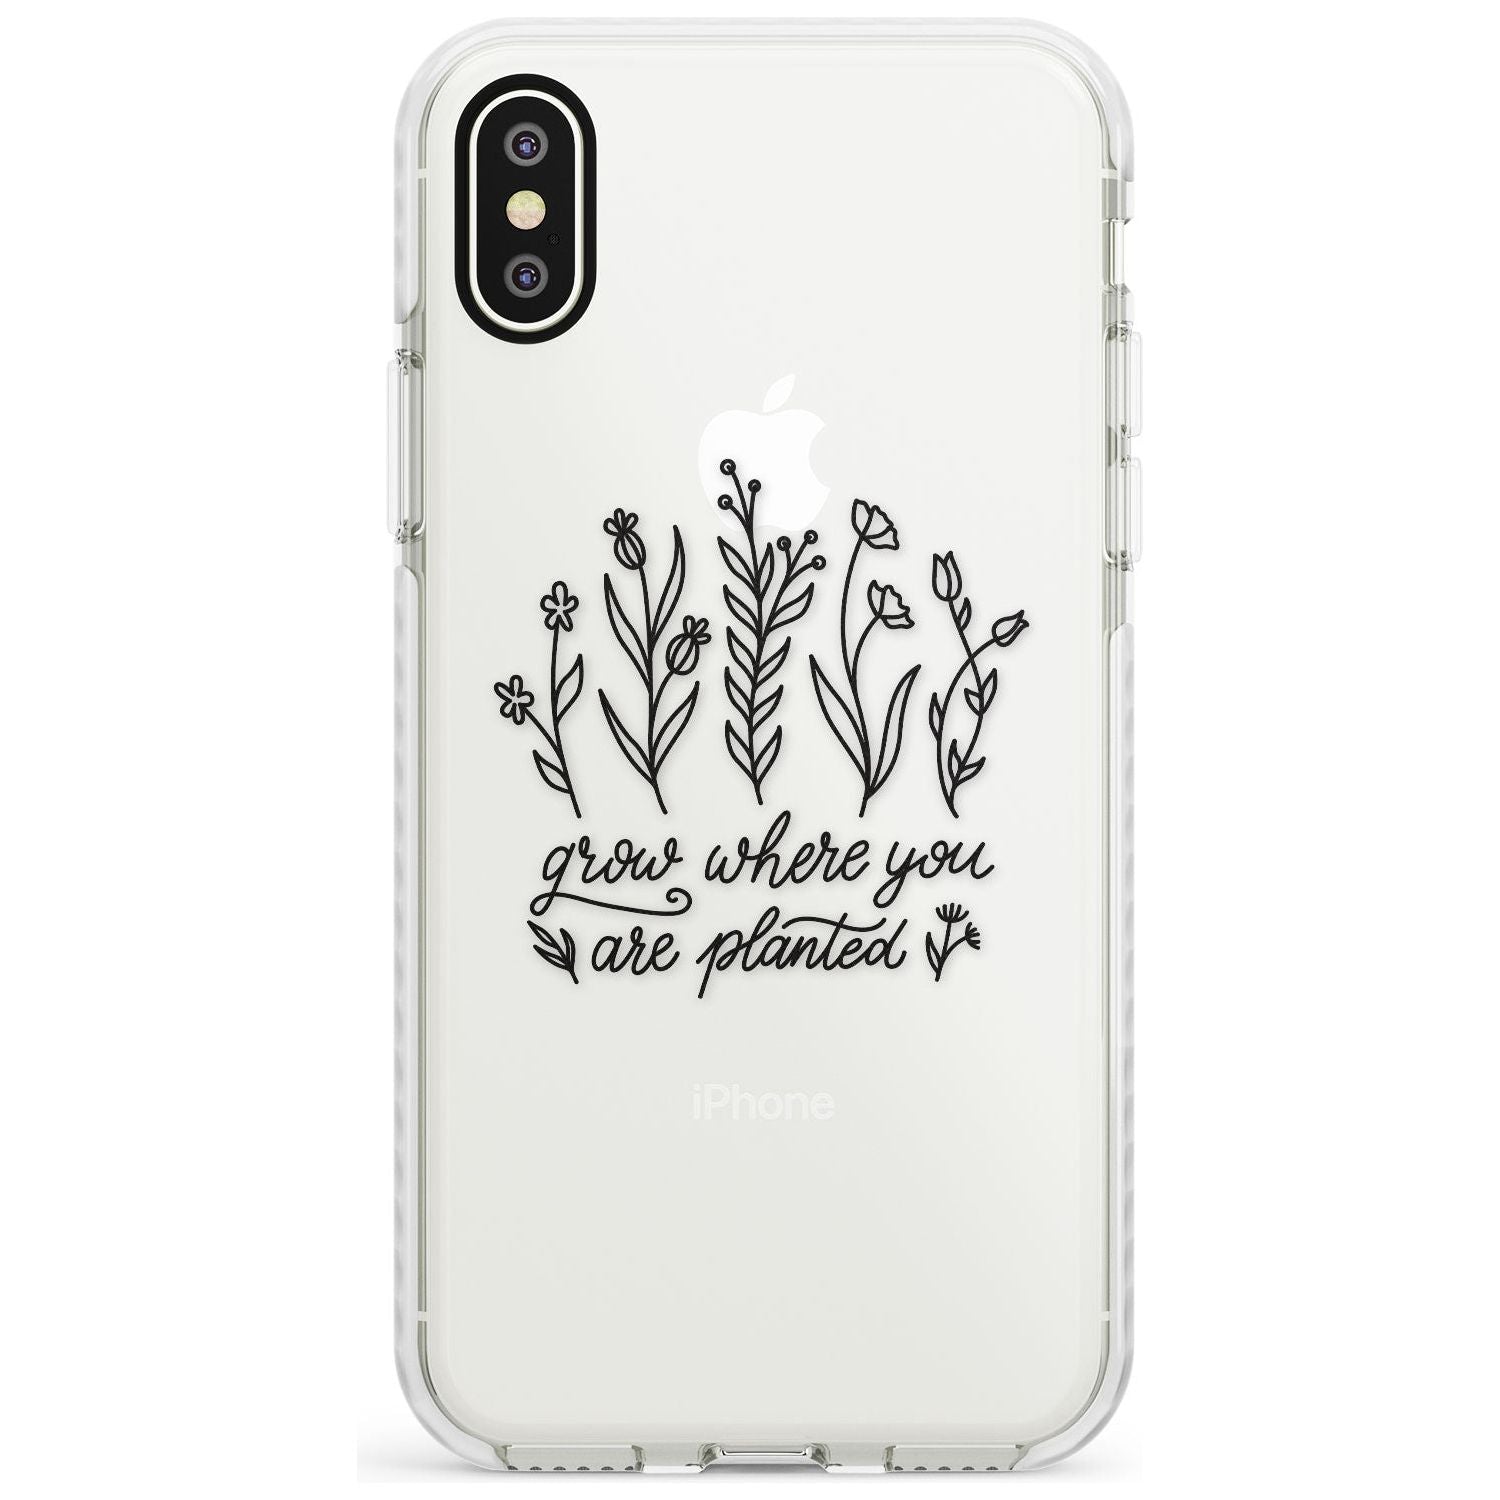 Grow where you are planted Impact Phone Case for iPhone X XS Max XR